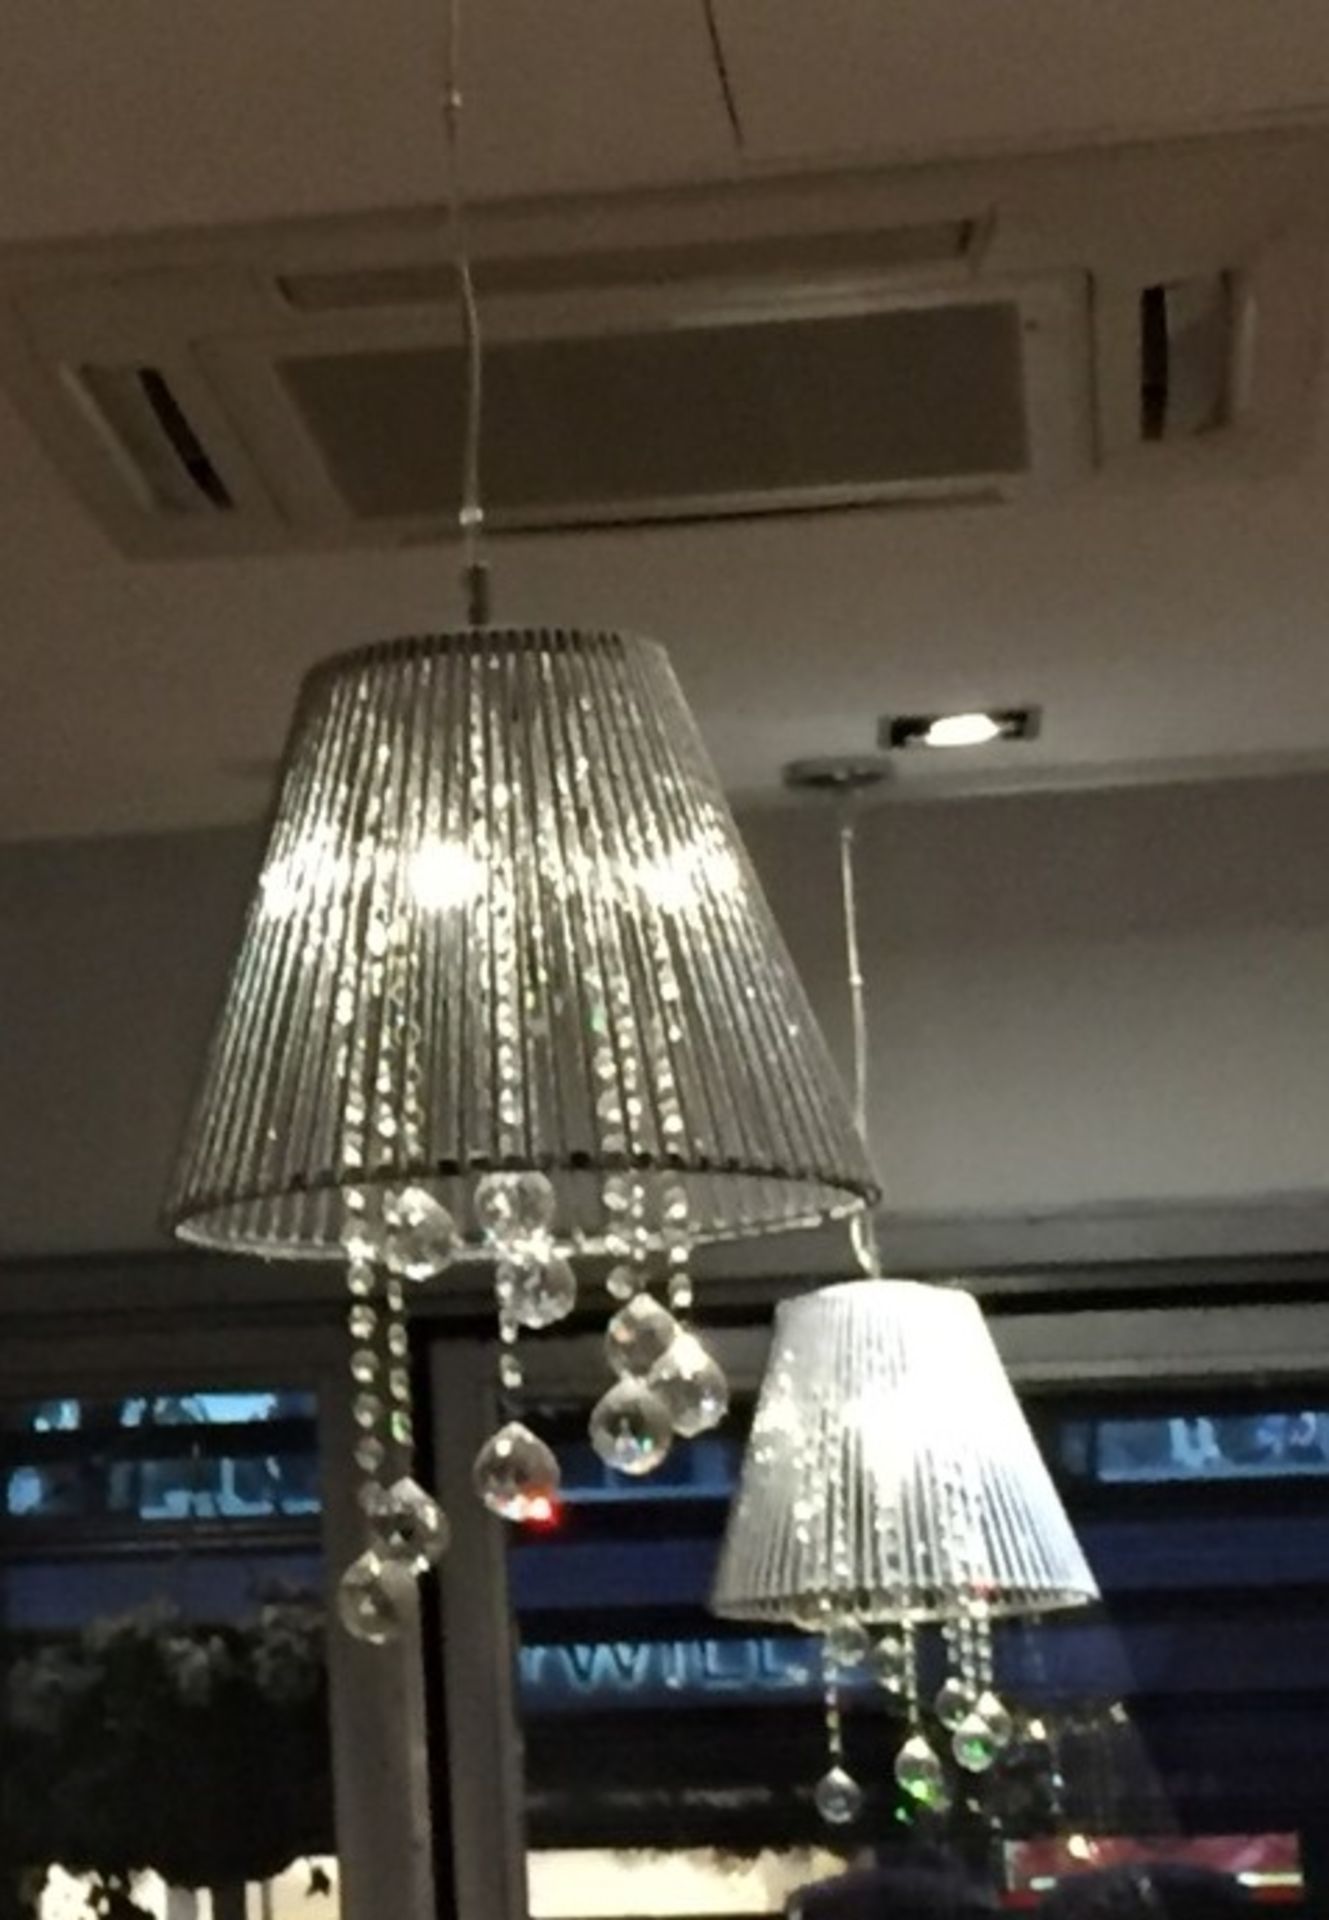 2 x Contemporary Pendant Ceiling Lights With Faux Crystal Droplets - CL188 - Ref GF1 - Location: - Image 4 of 4